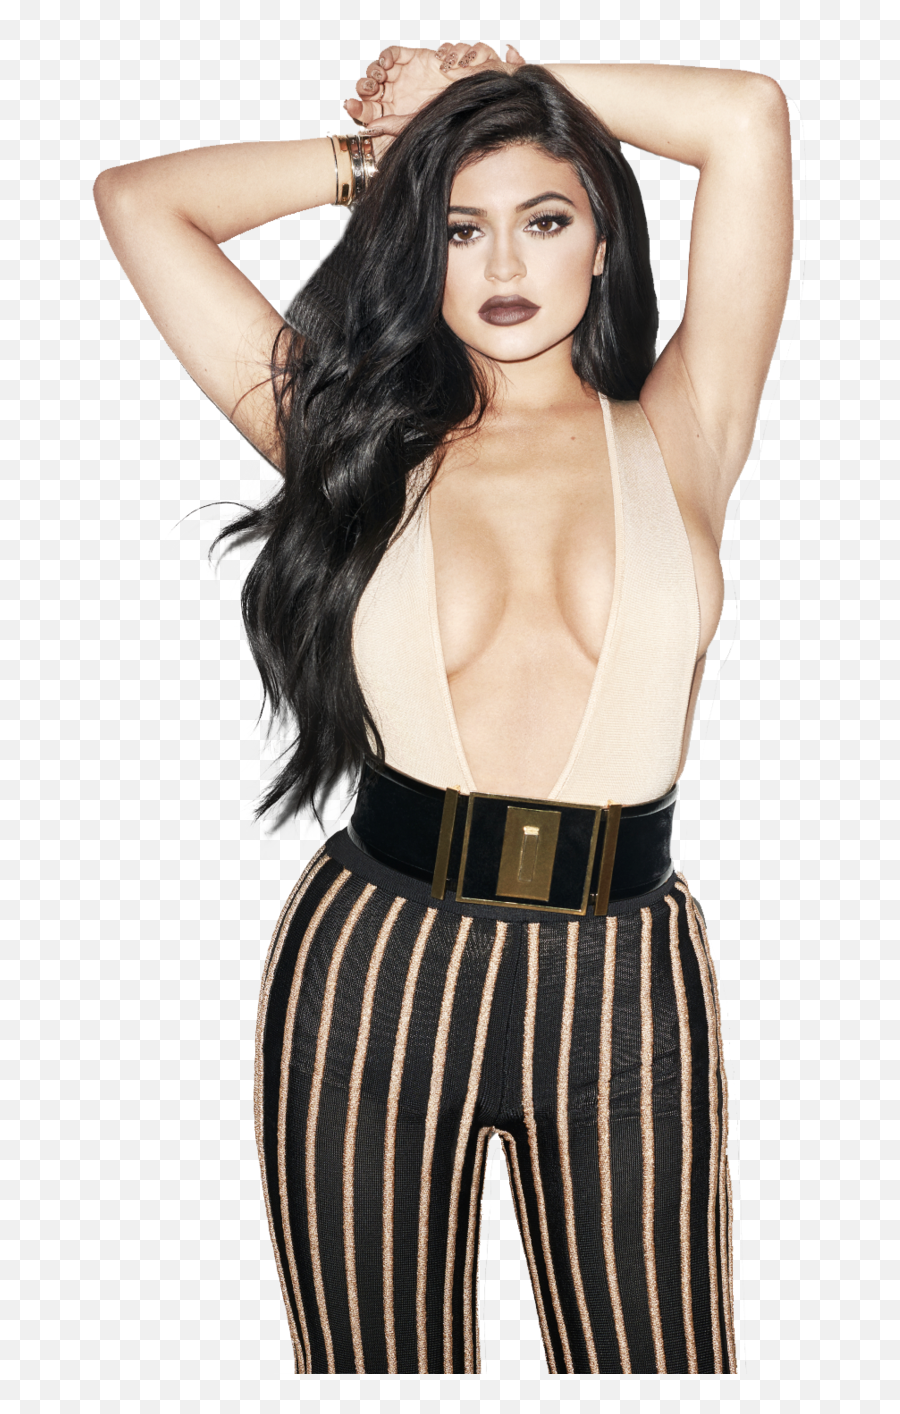 Png Maarcopngs 4 0 Kylie Jenner - Kylie Jenner Terry Richardson,Kylie Jenner Transparent